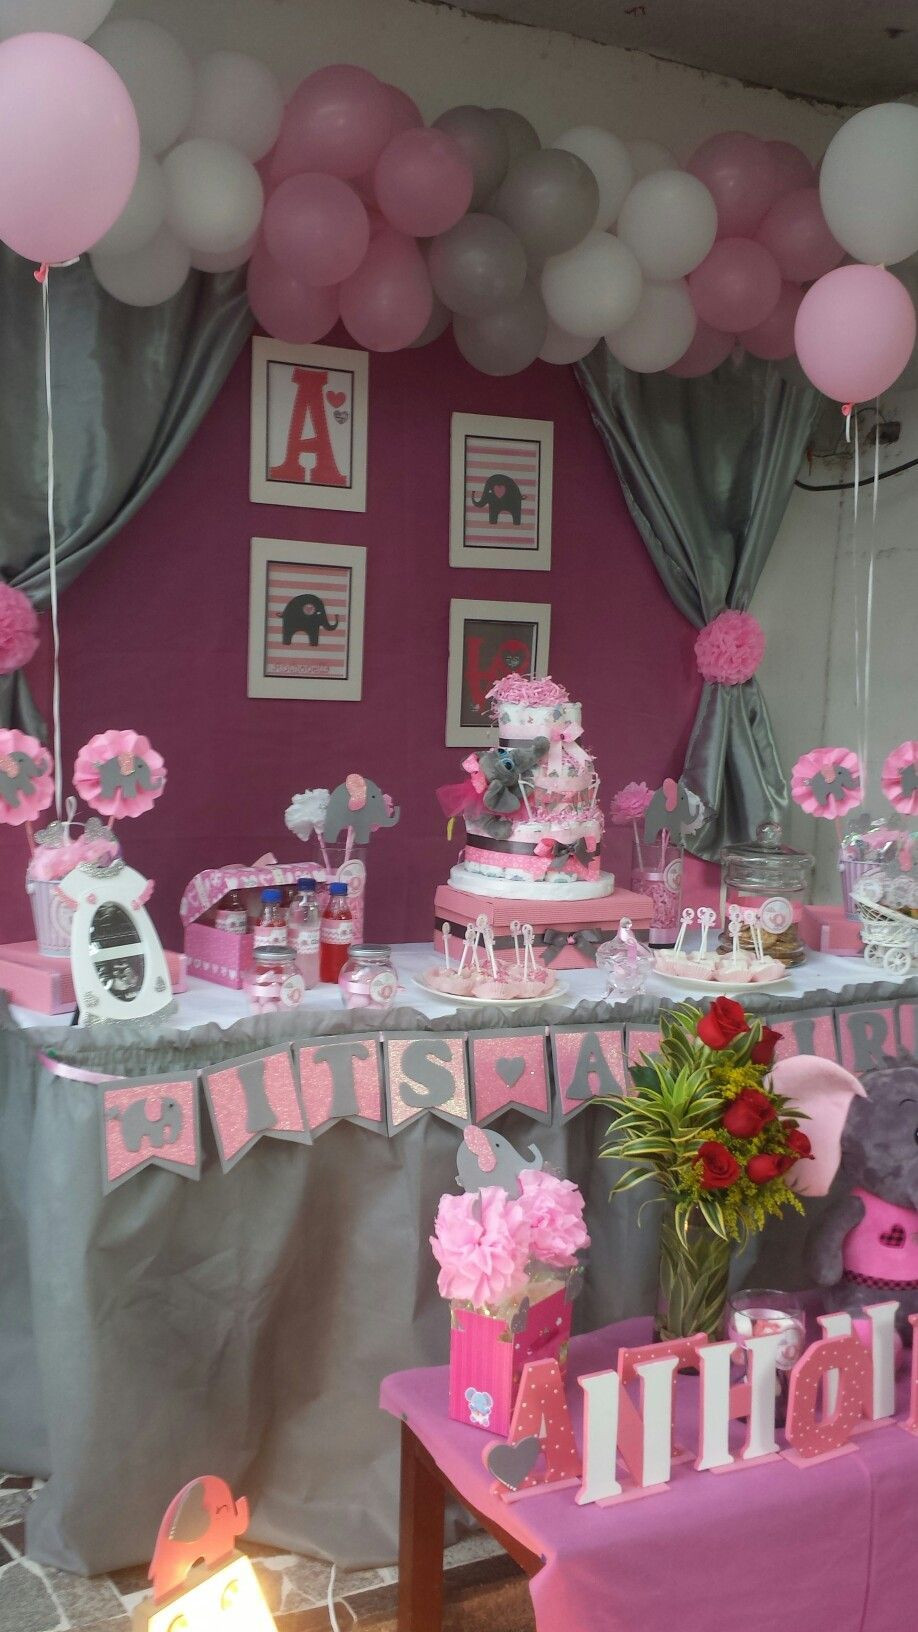 Baby Shower Decor Ideas For Girls
 These Low Bud Baby Shower Ideas Won’t Empty Your Wallet